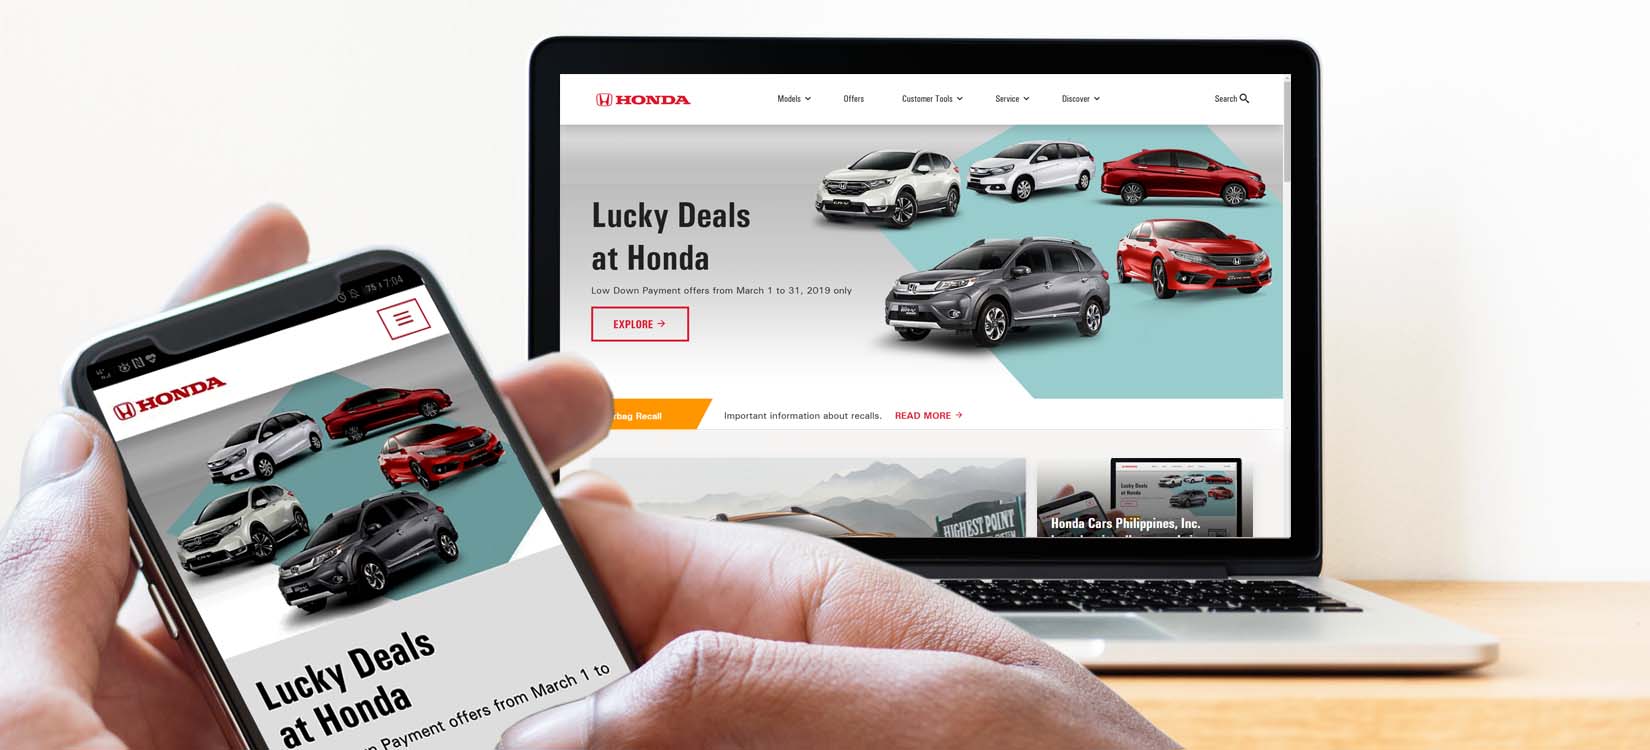 Honda Cars Philippines, Inc. launches its all new website